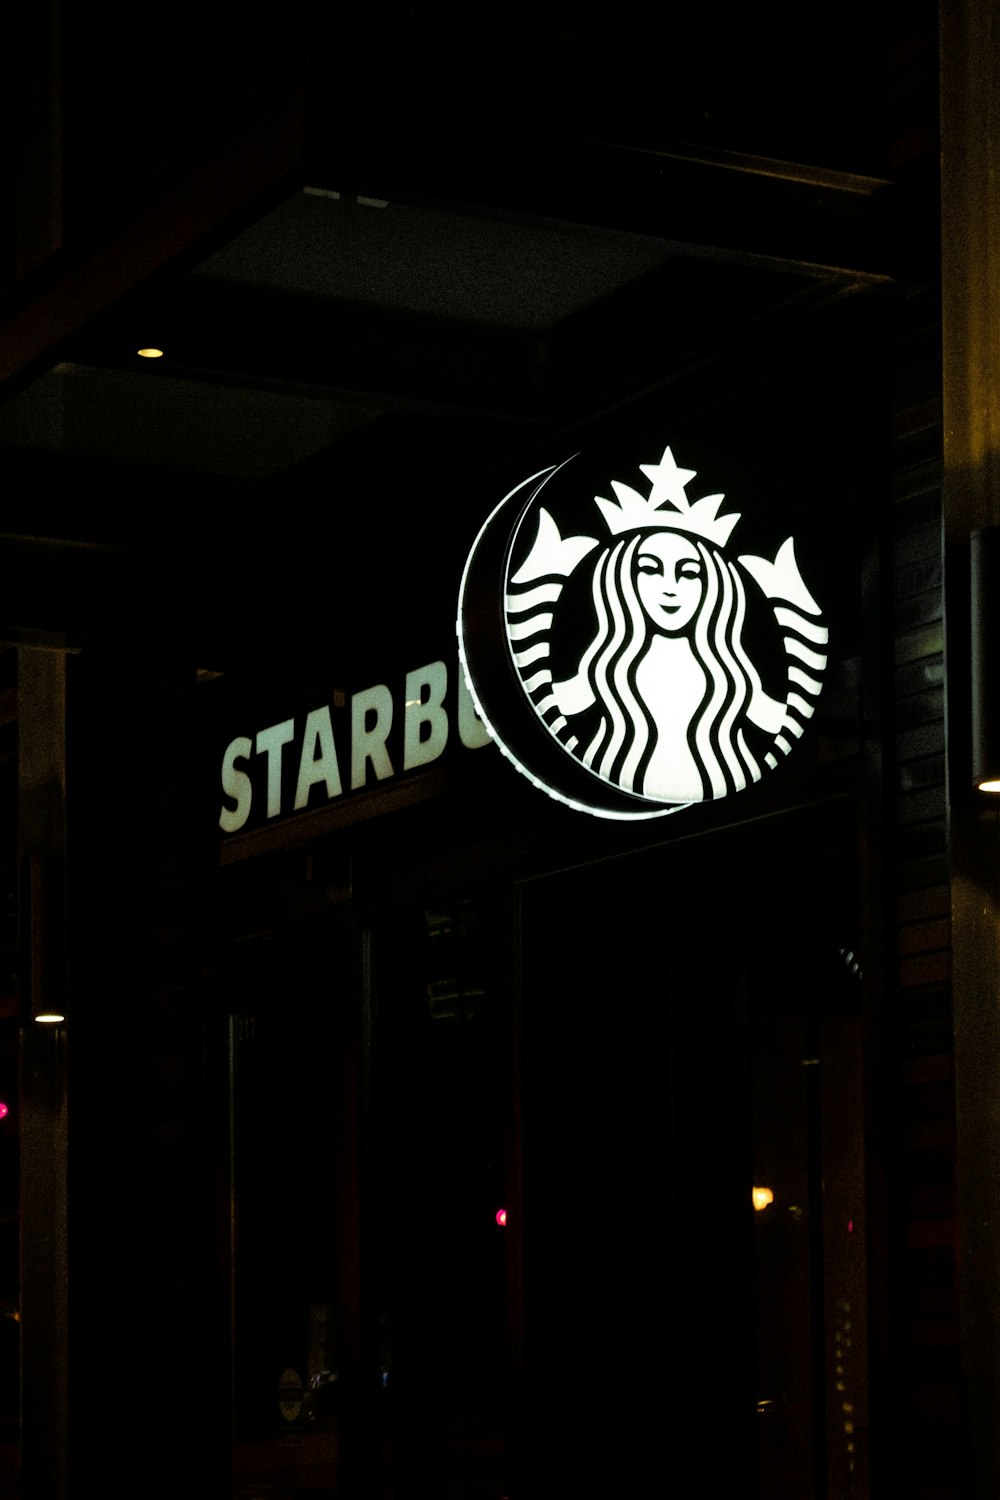 a starbucks sign lit up in the dark